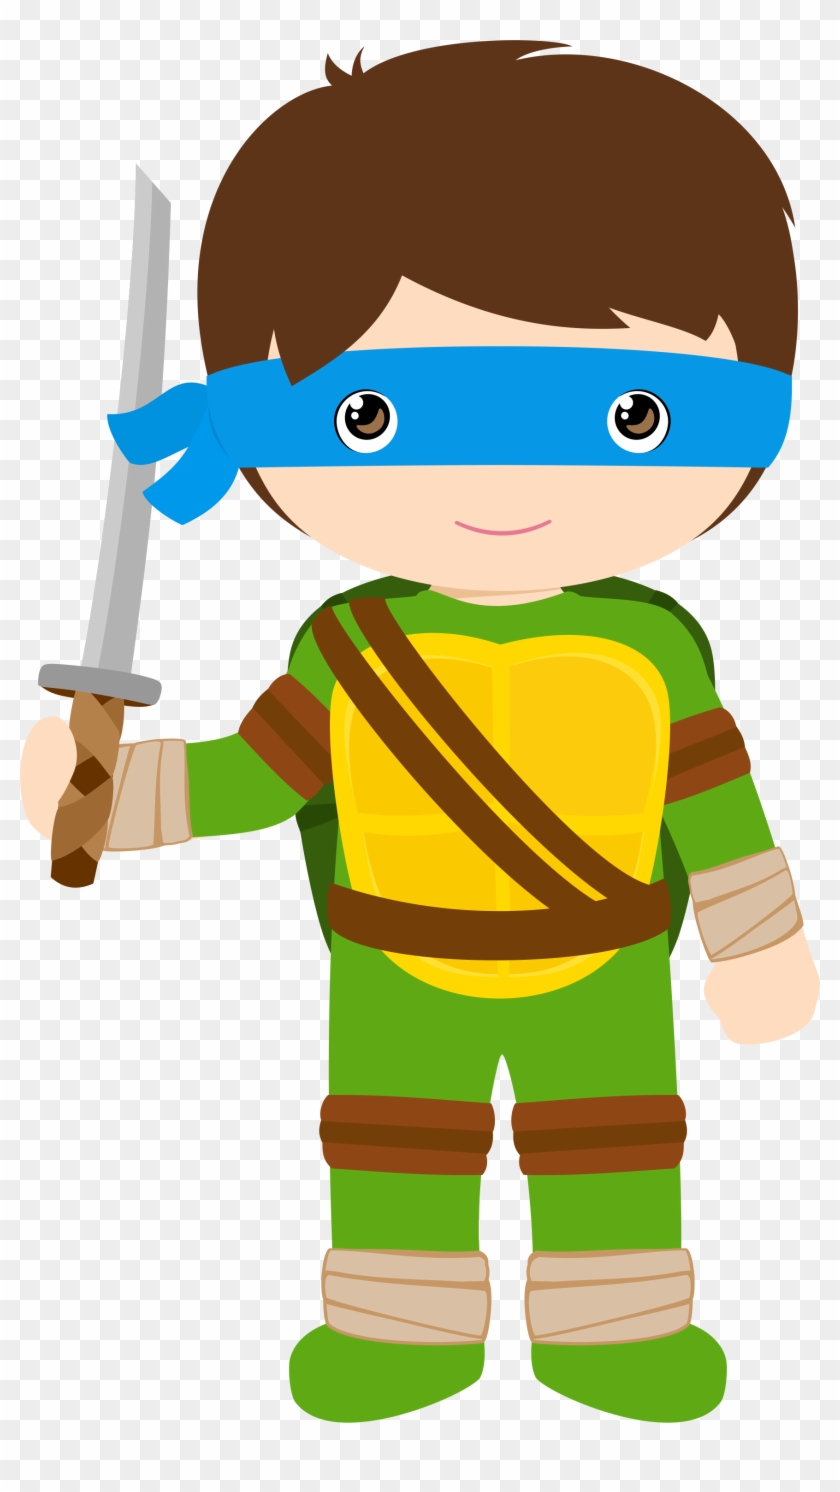 Boys Costumes - Ninja Turtle Costume Clipart - Png Download #3562545